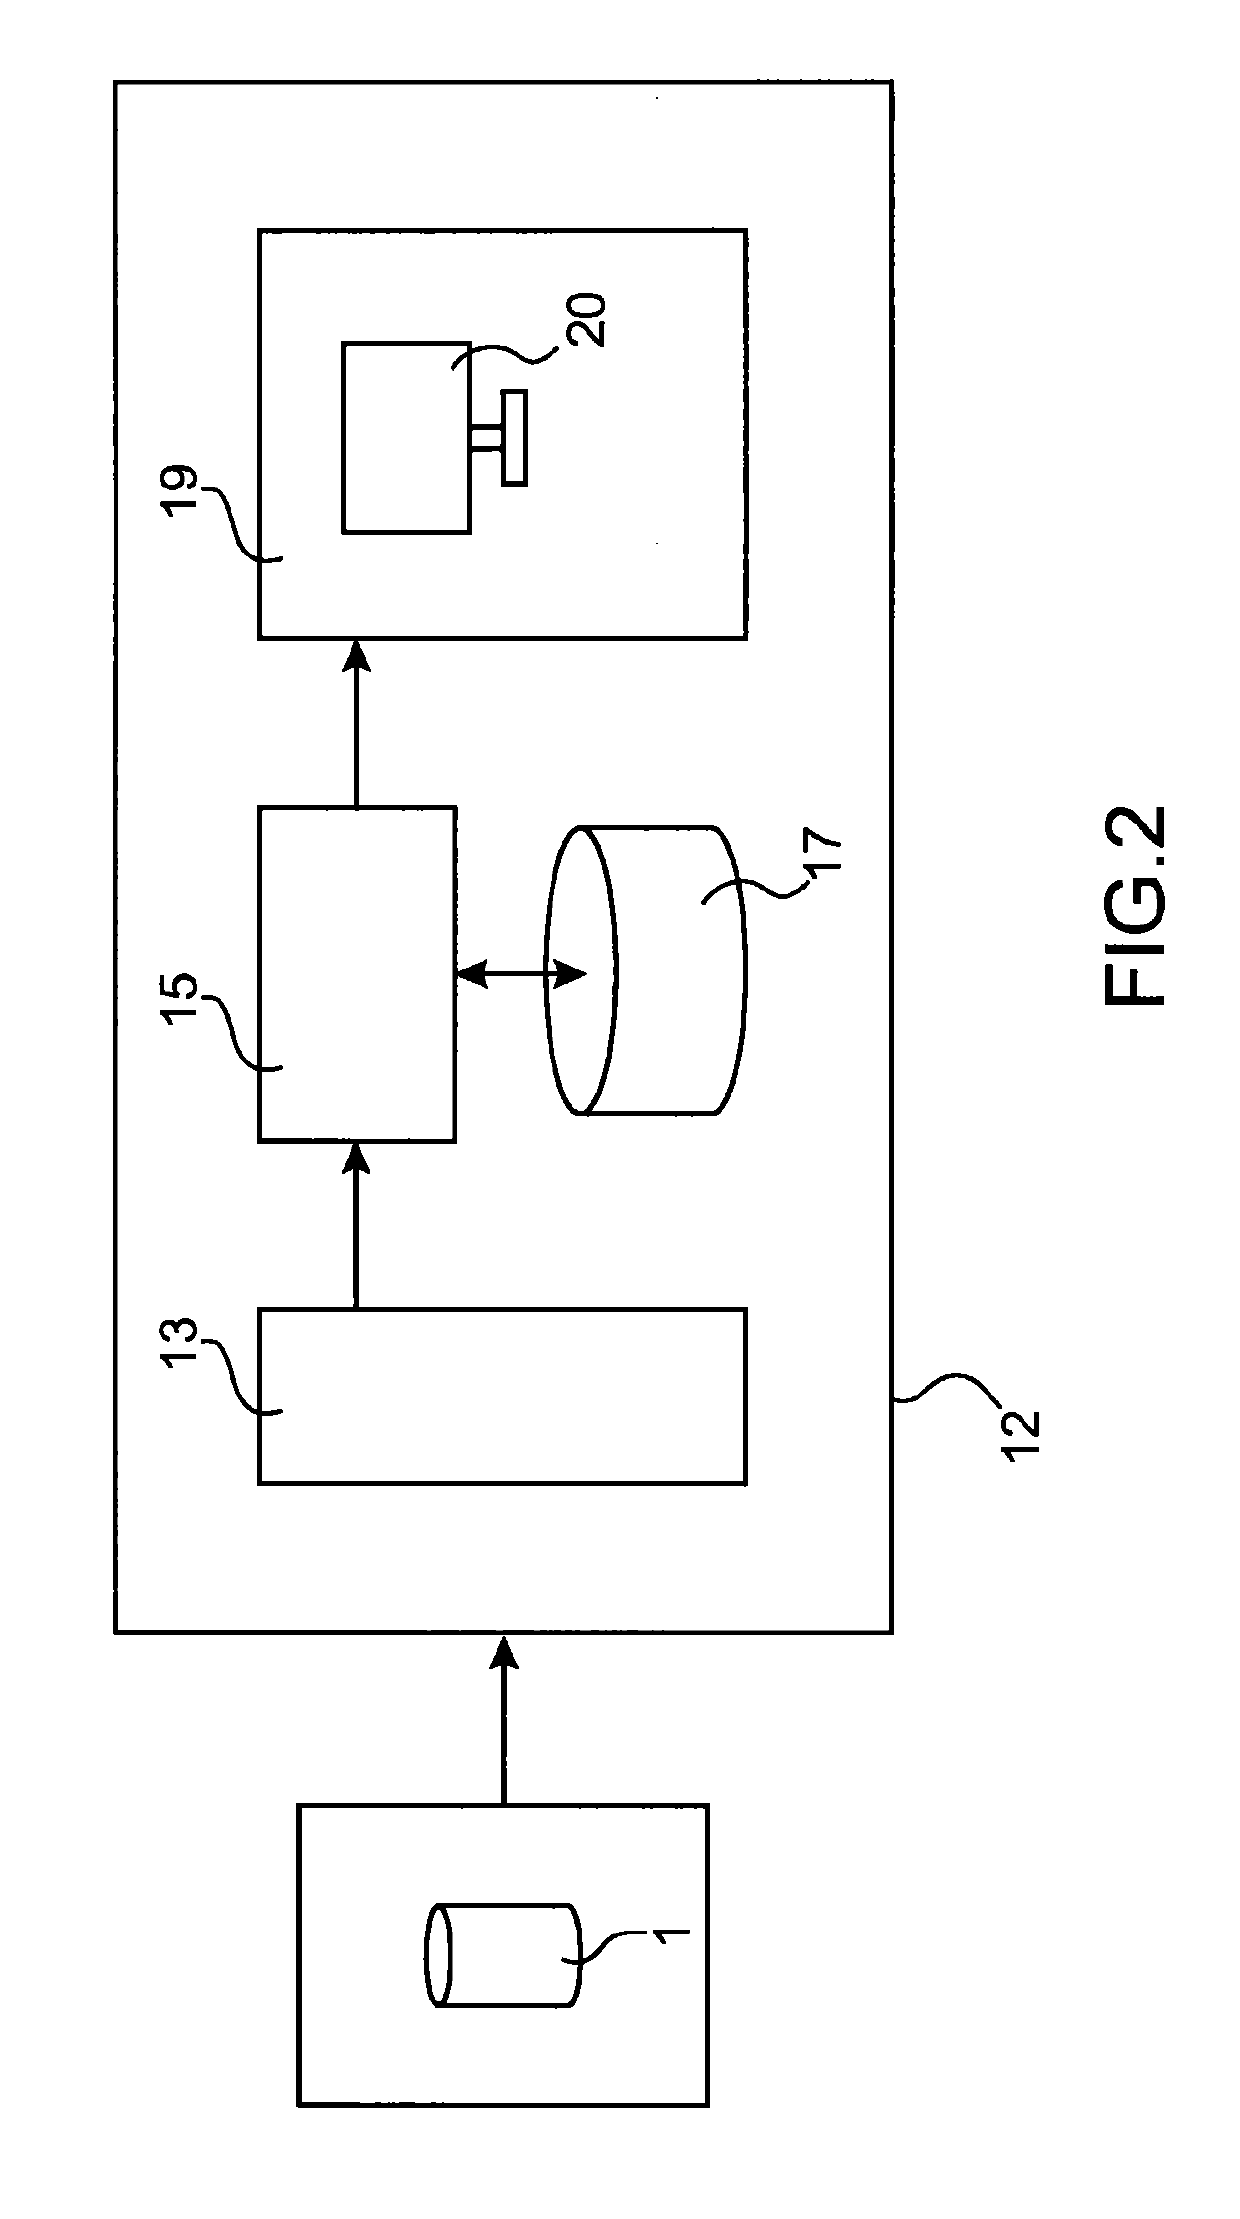 System and method for dynamically locating a fault observed on a component